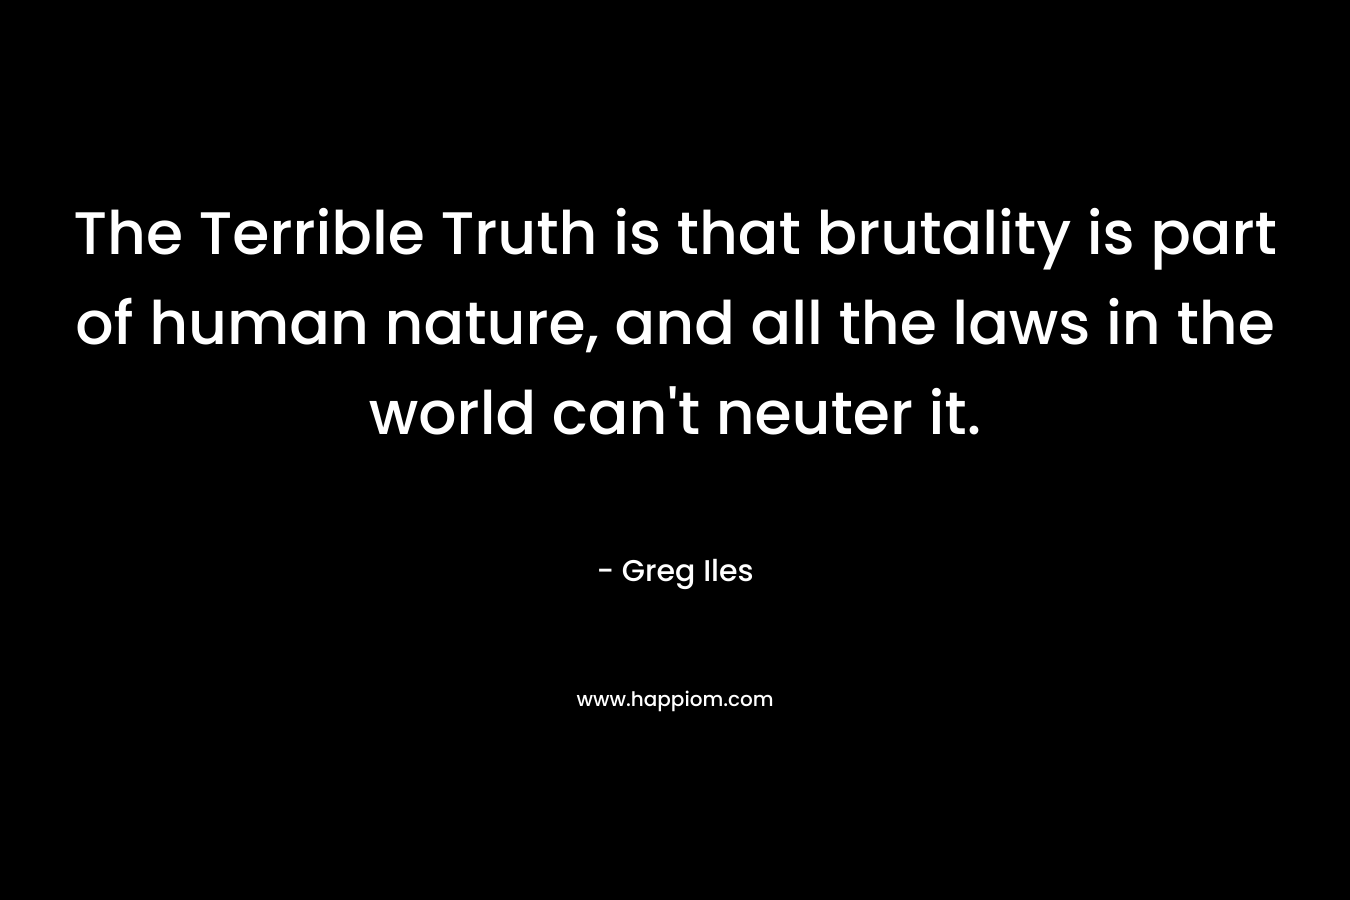 The Terrible Truth is that brutality is part of human nature, and all the laws in the world can't neuter it.